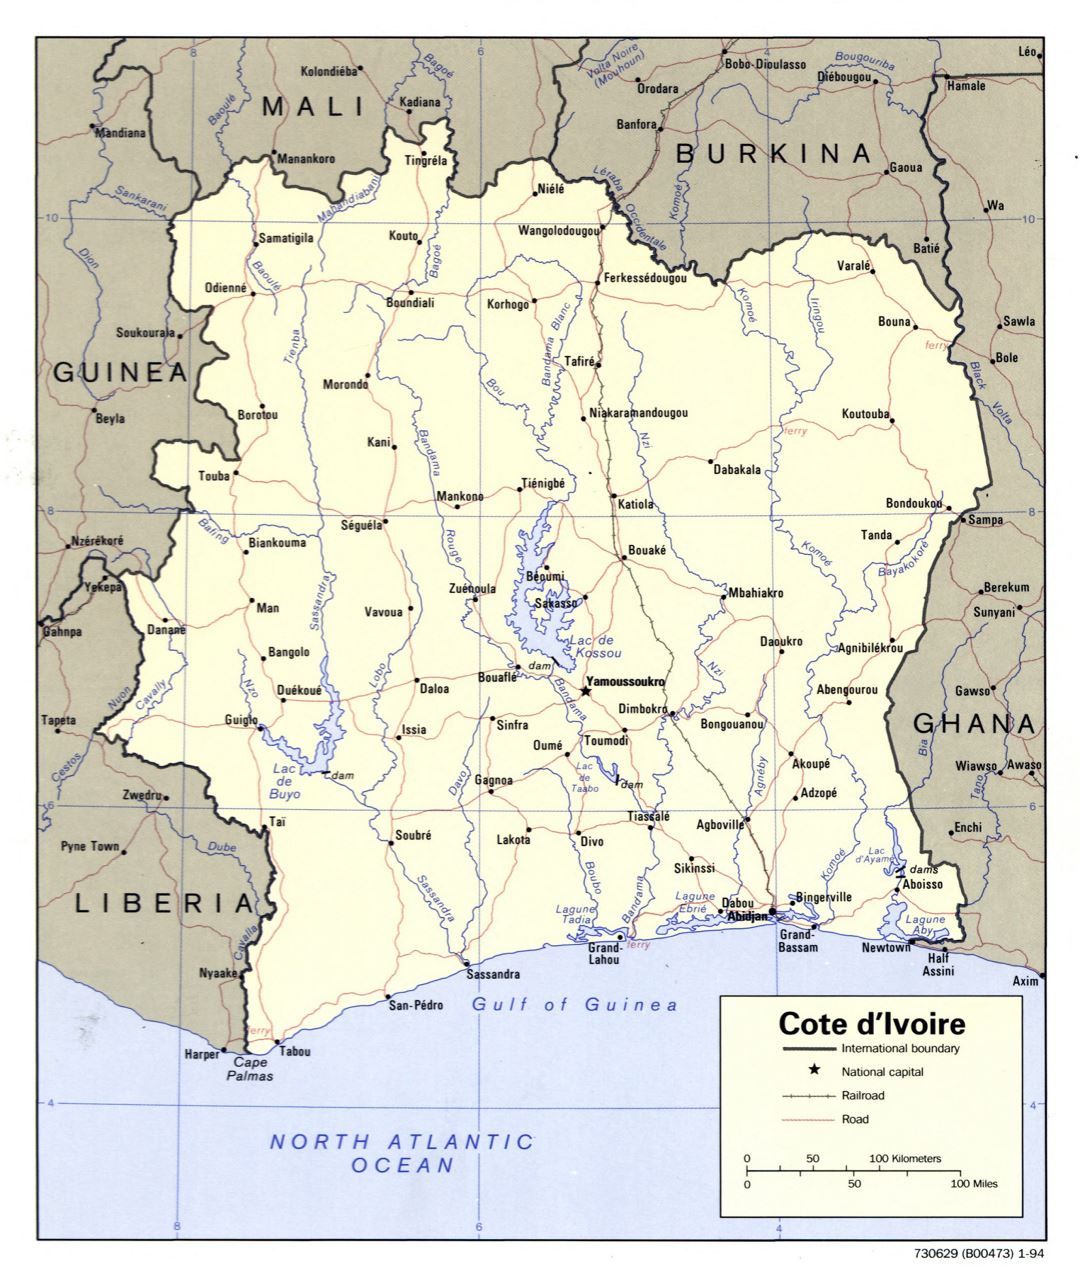 Large scale political map of Cote d'Ivoire with roads, railroads and major cities - 1994